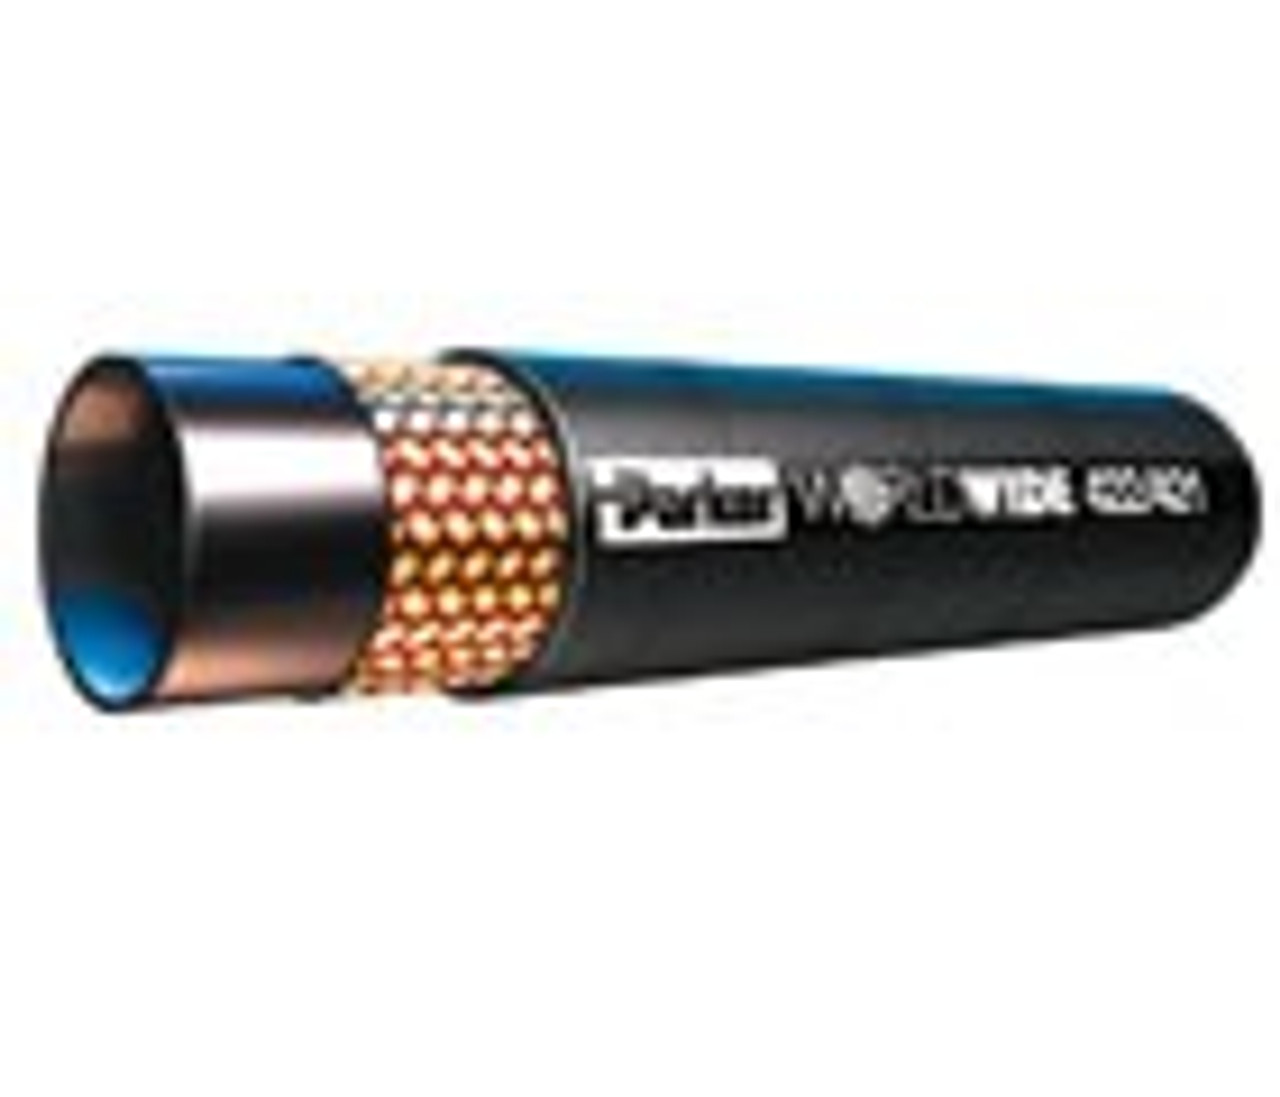 Parker 422-6-Rl 3/8" Id Worldwide Hydraulic Hose Black Synthetic Rubber Cover With Black Layline 2600Psi (179Bar) 1 Wire Braid Temp Range Degrees F: (-40/+212) Sae 100R1At Iso 1436-1-1Sn